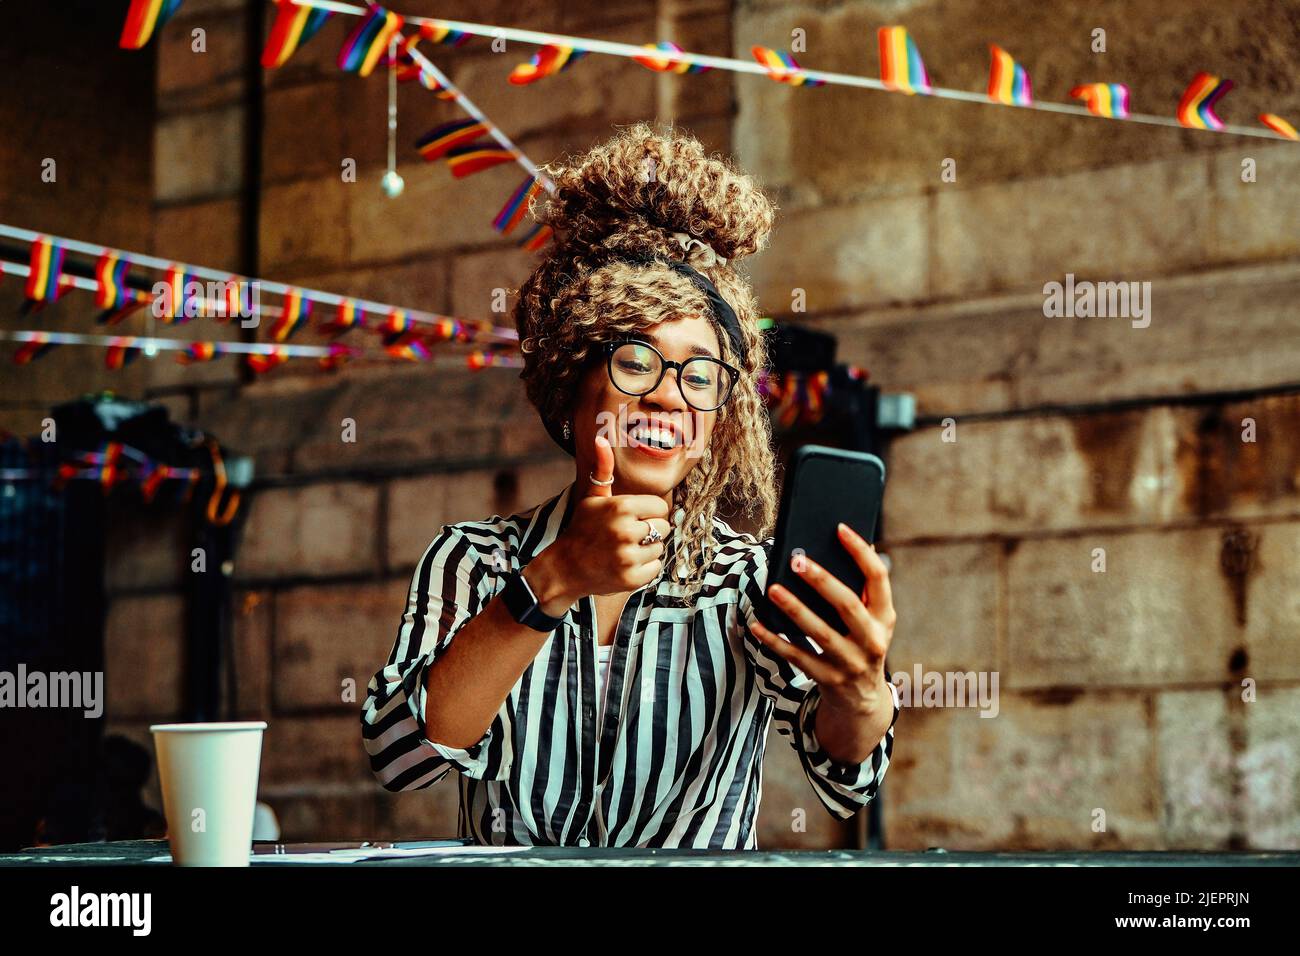 Portrait of smiling woman with afro hairstyle and eyeglasses on a phone video call with thumbs up sitting in a coffeehouse shot Stock Photo